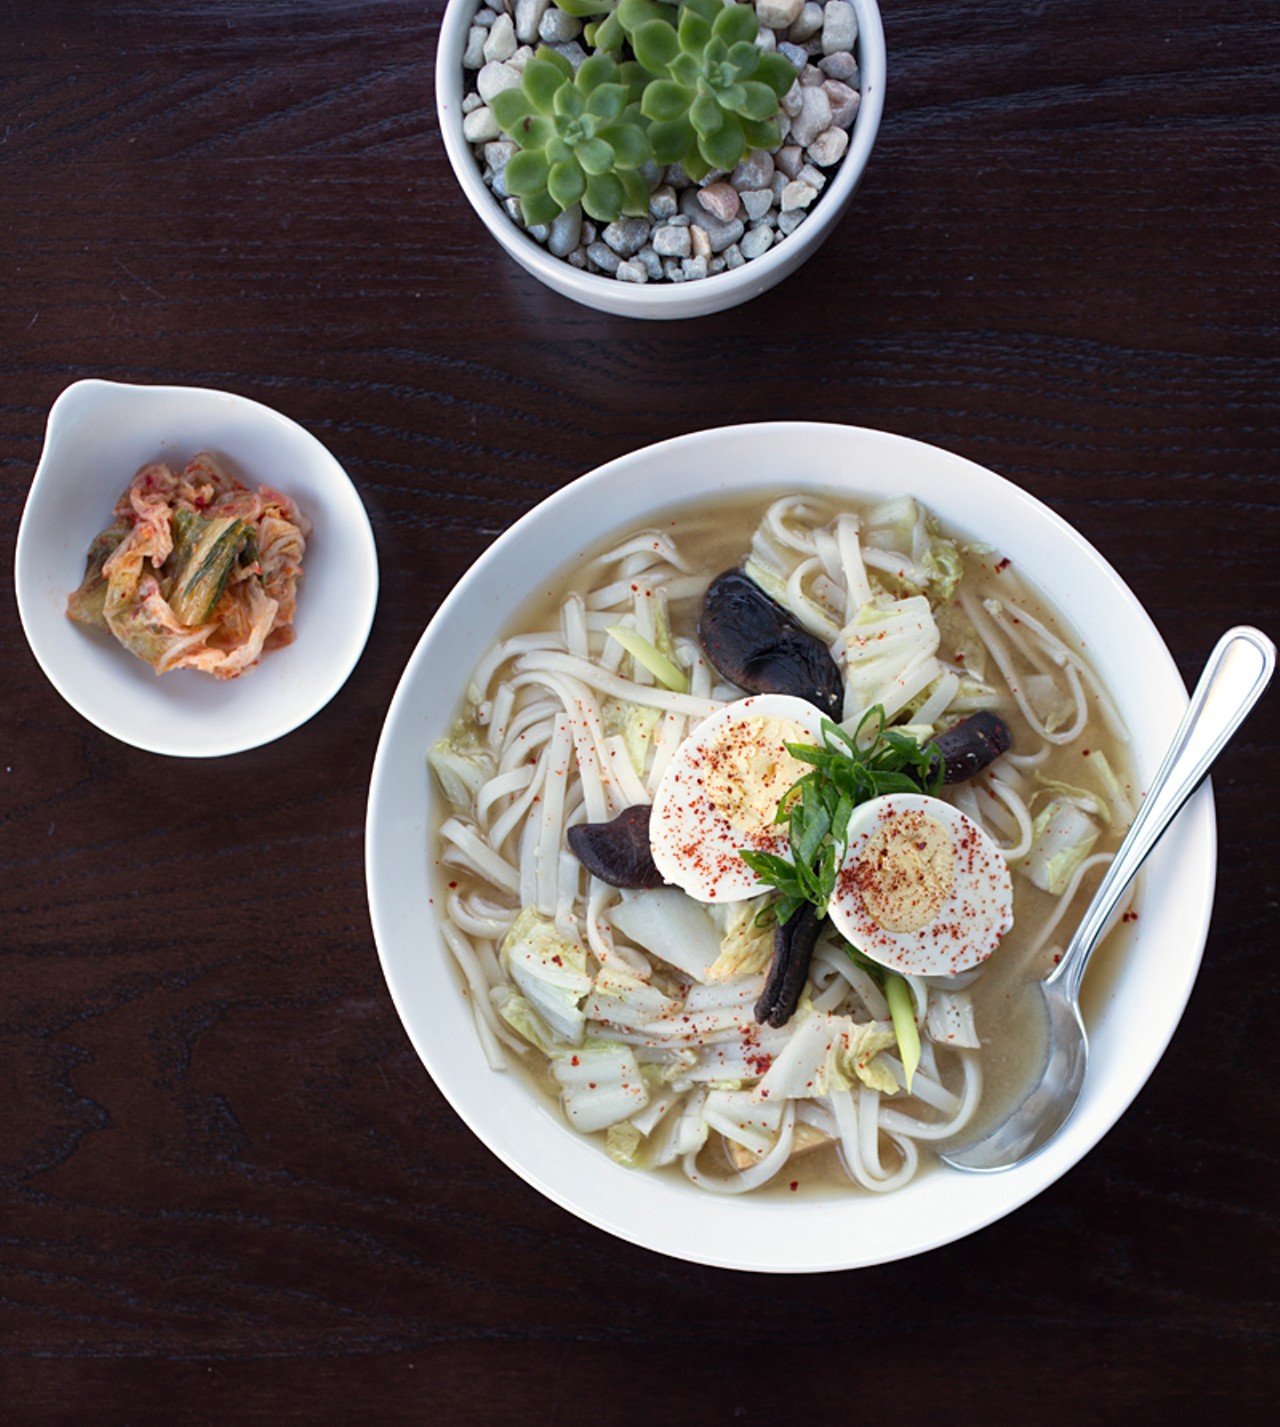 Obaachan's -- or Grandma's -- udon soup is a bowl of noodles, vegan dashi, red miso, cabbage, shiitake mushroom, scallion, tofu and a side of kimchi. Here, it's seen with the optional hard-boiled egg.